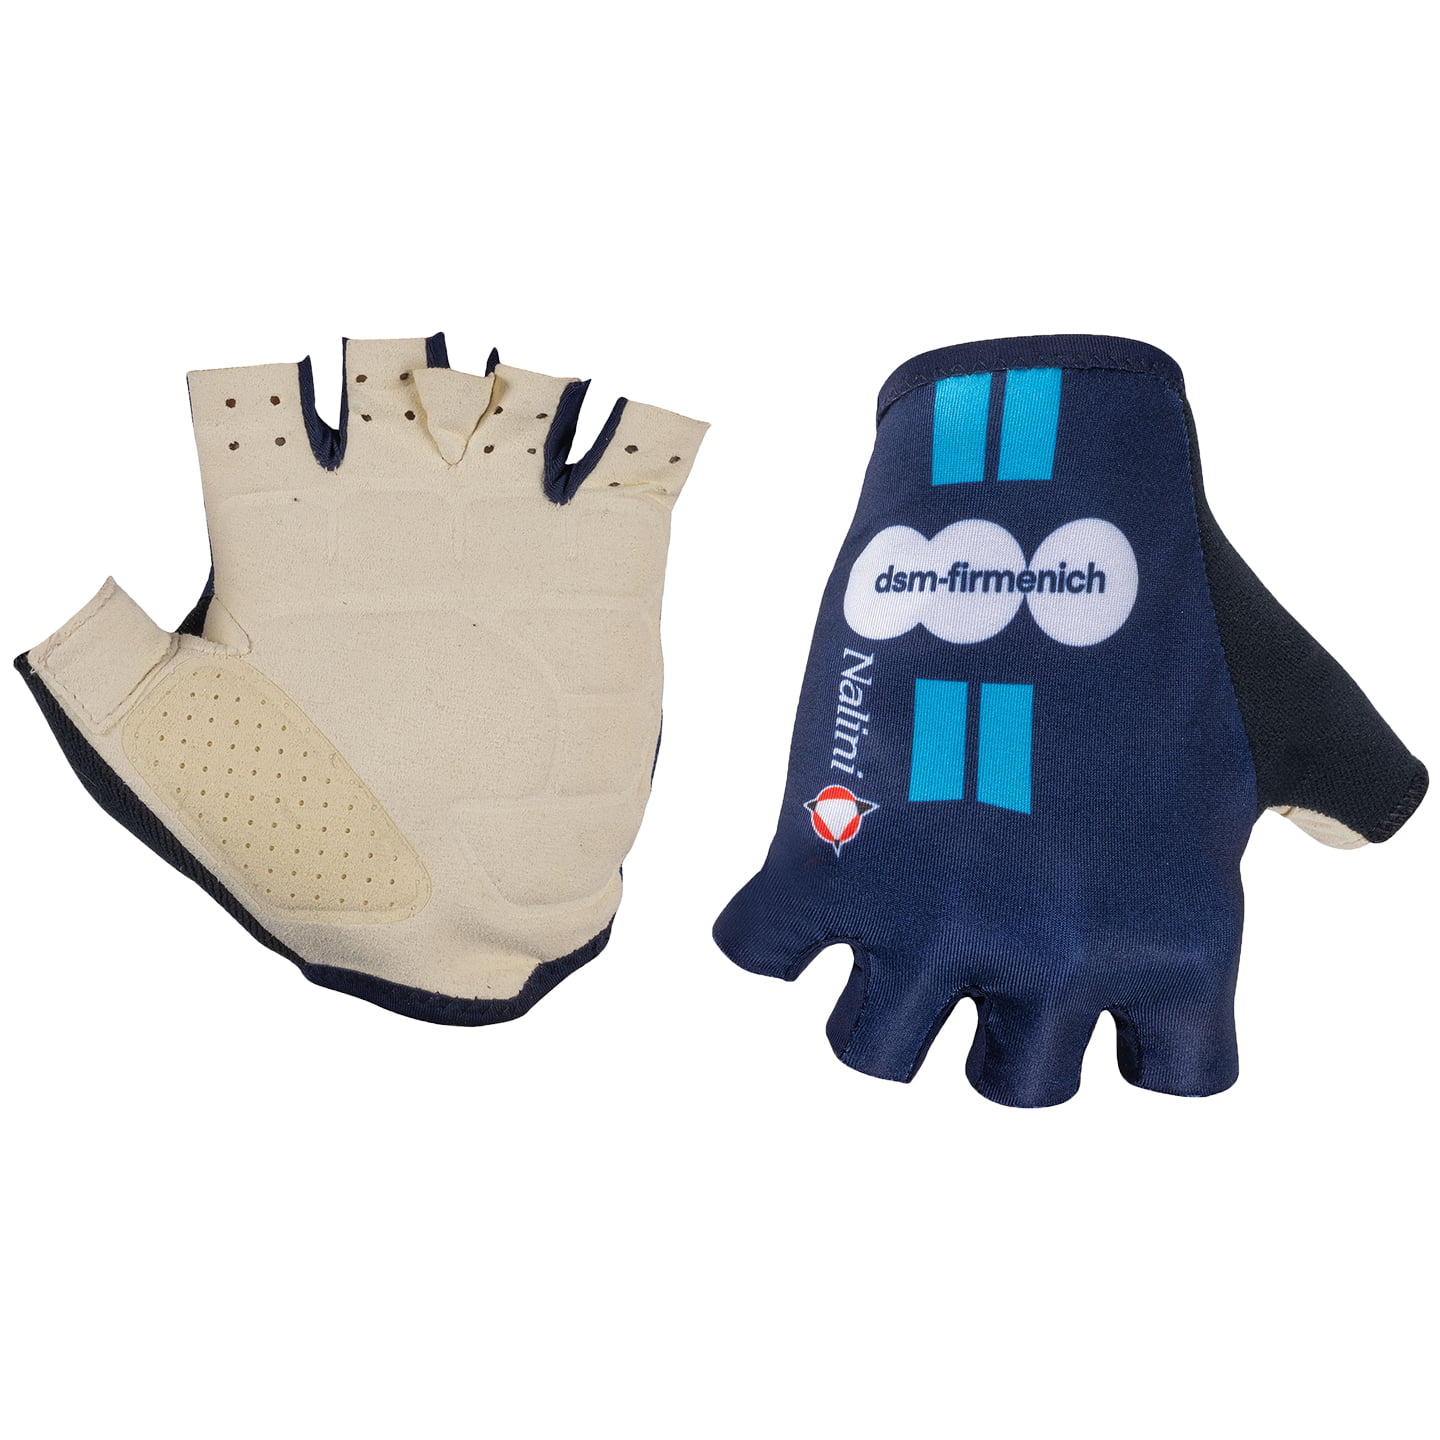 TEAM DSM TdF 2023 Cycling Gloves, for men, size L, Cycling gloves, Bike gear